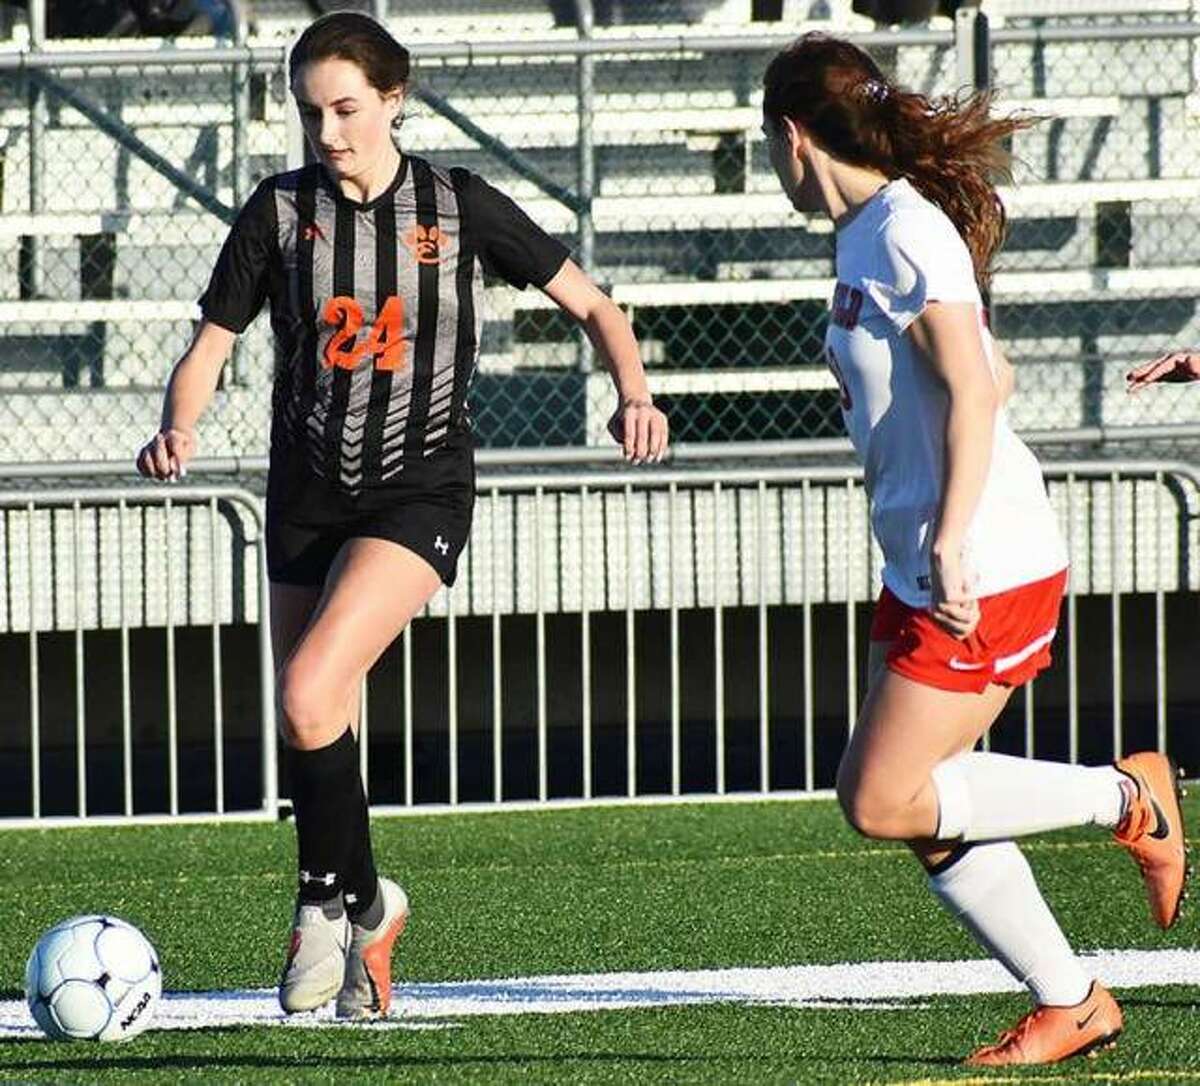 Edwardsville midfielder Rileigh Kuhns dribbles the ball down the field against a defender during a home game inside the District 7 Sports Complex.